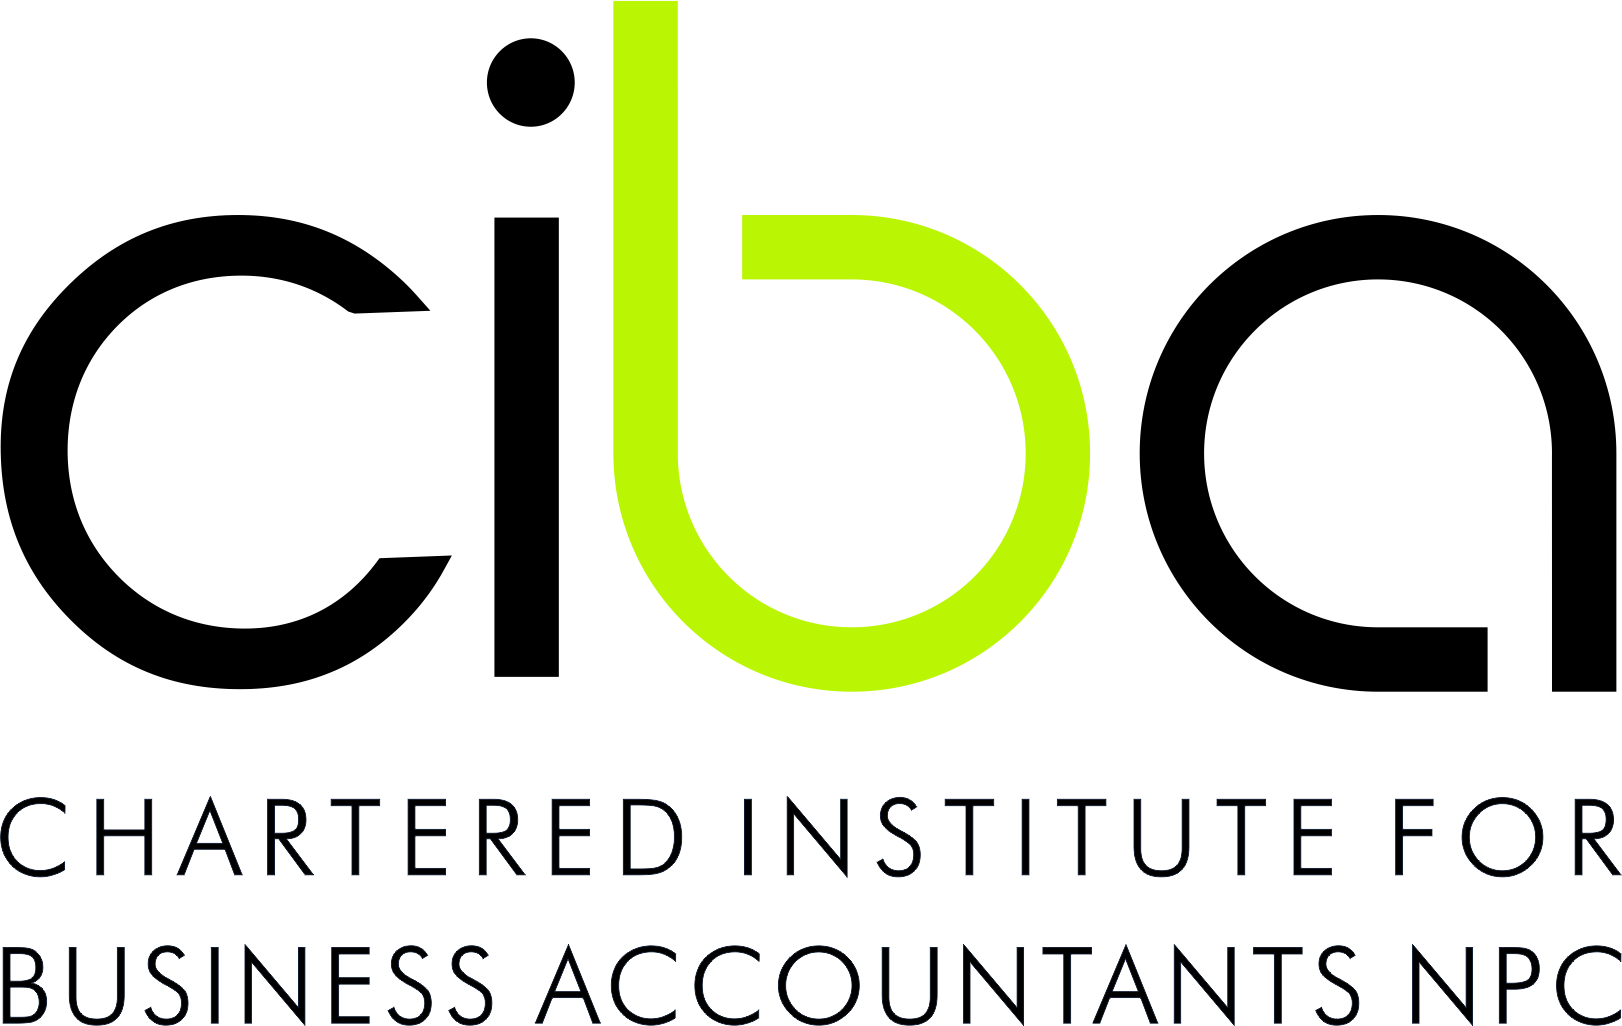 Chartered Insitute for Business Accountants